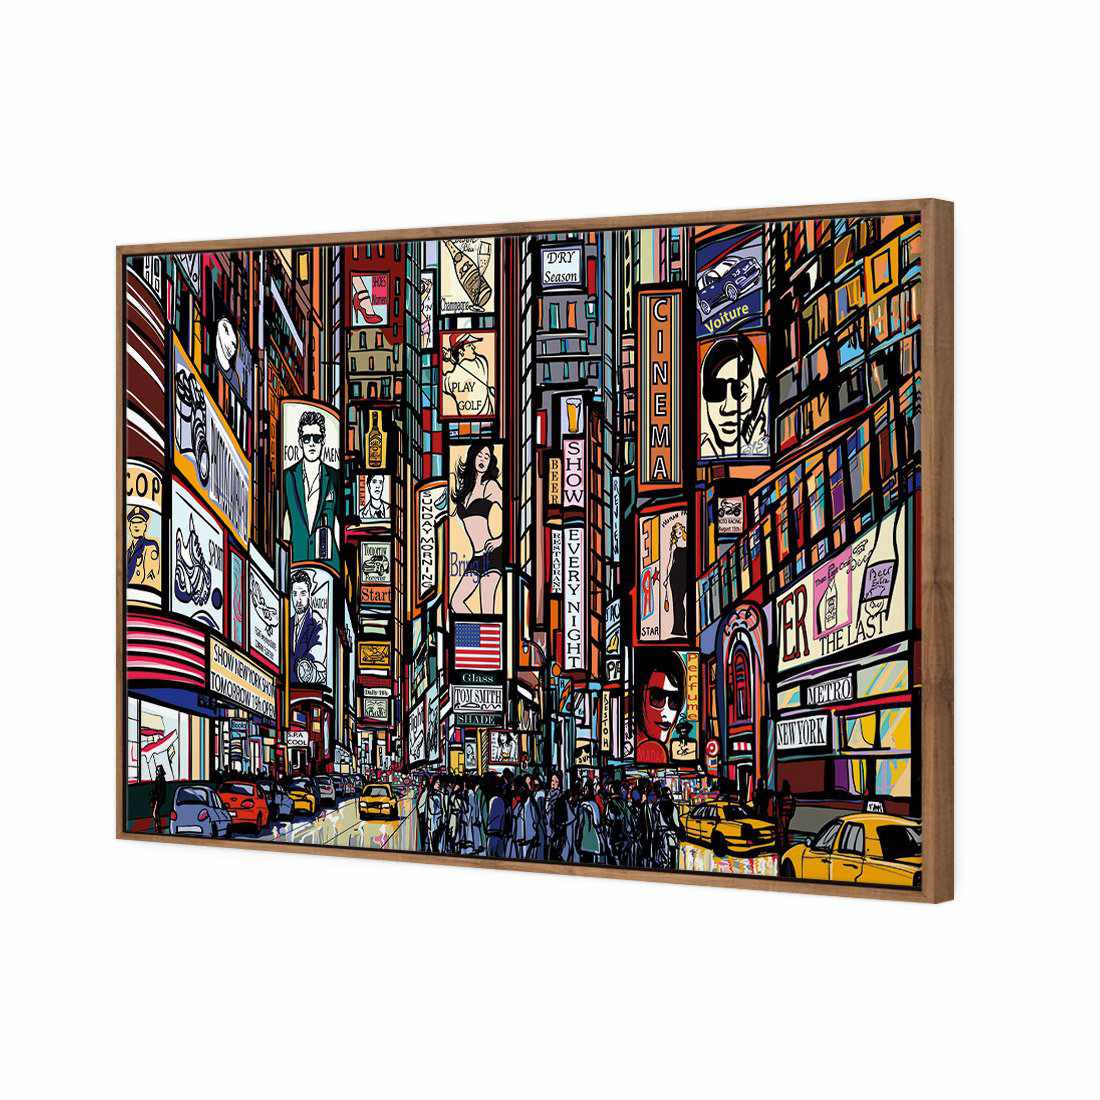 New York Advertised Canvas Art-Canvas-Wall Art Designs-45x30cm-Canvas - Natural Frame-Wall Art Designs